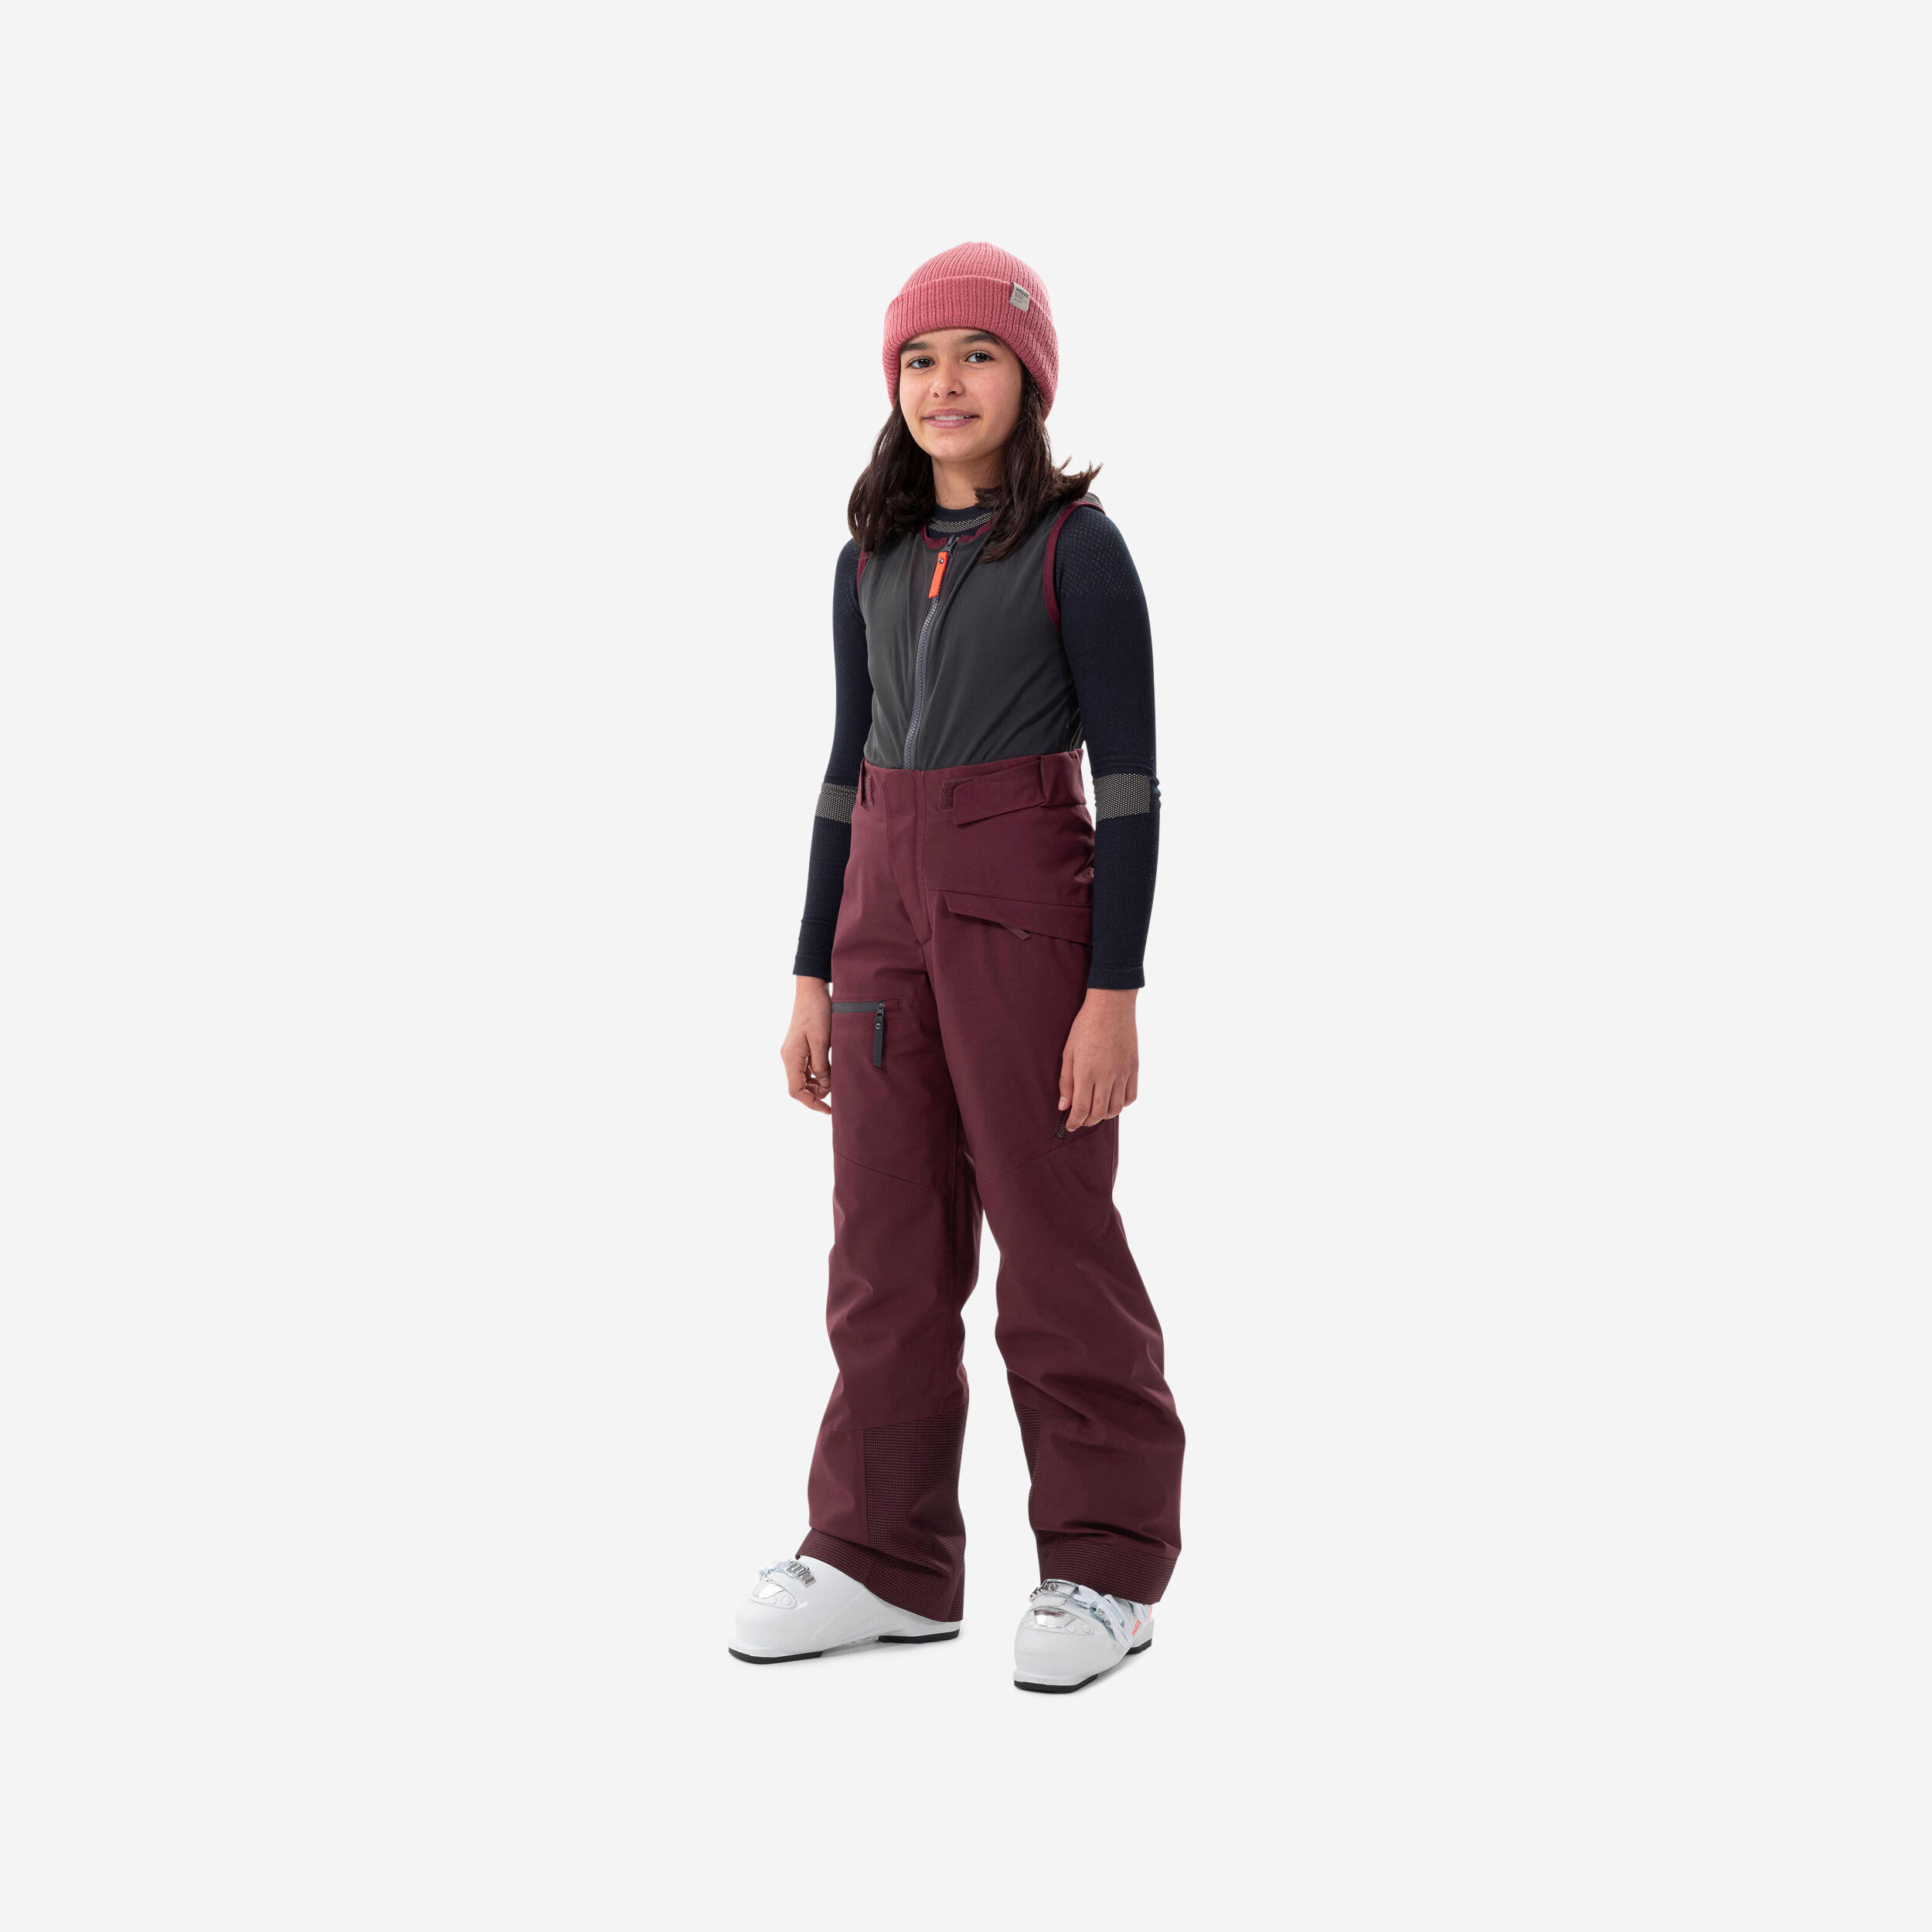 KIDS’ SKI TROUSERS WITH BACK PROTECTOR - FR900 - BURGUNDY 1/11